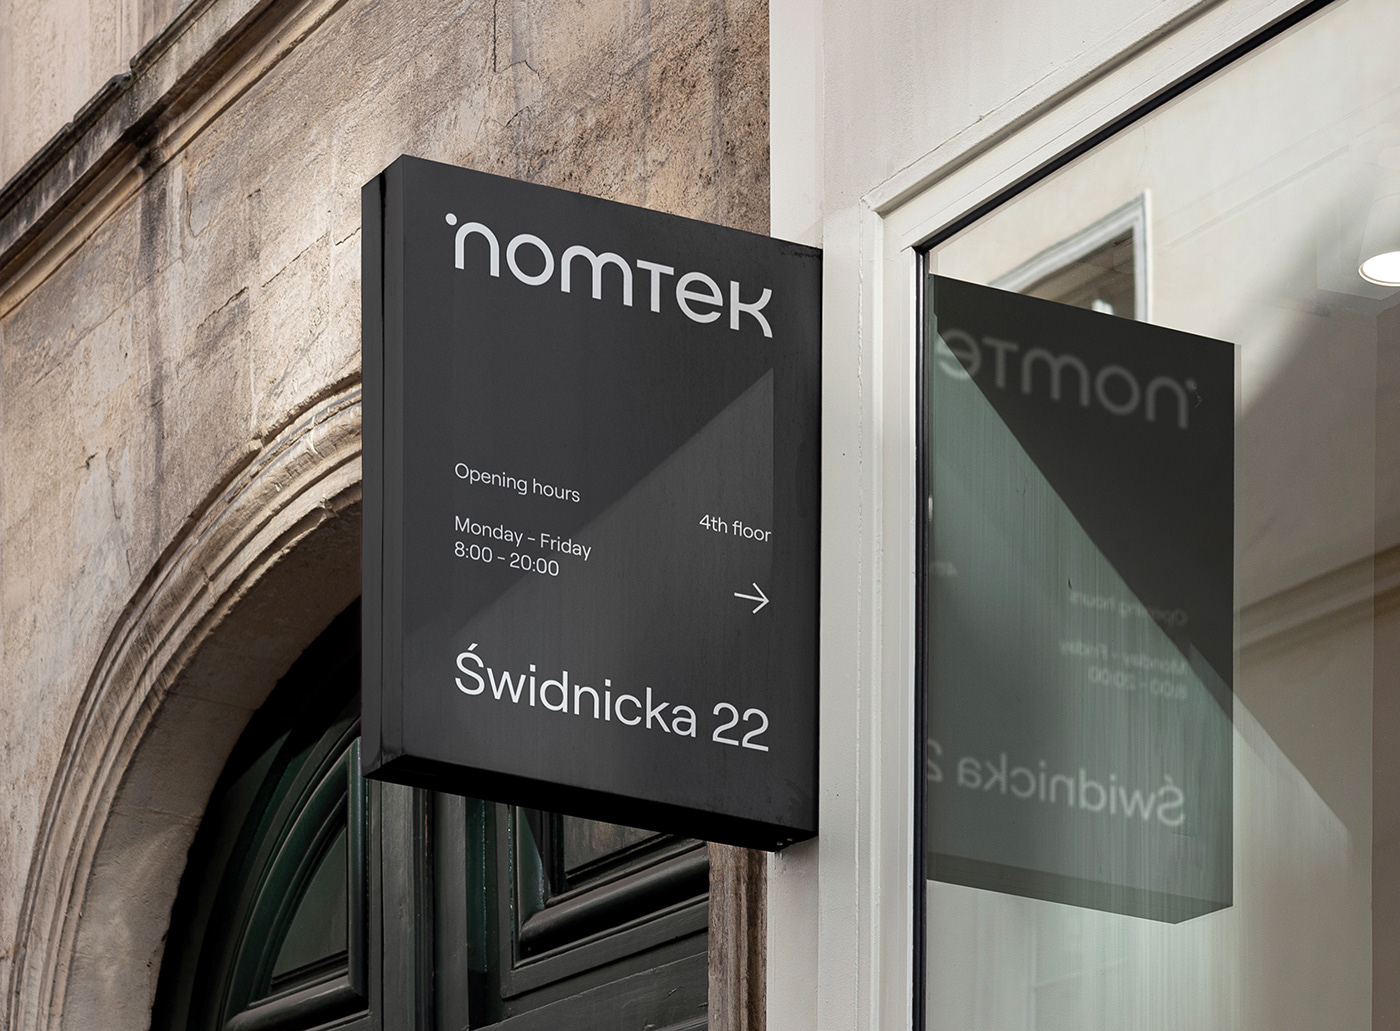 Outdoor signage deisgn as a part of new brand identity for Nomtek